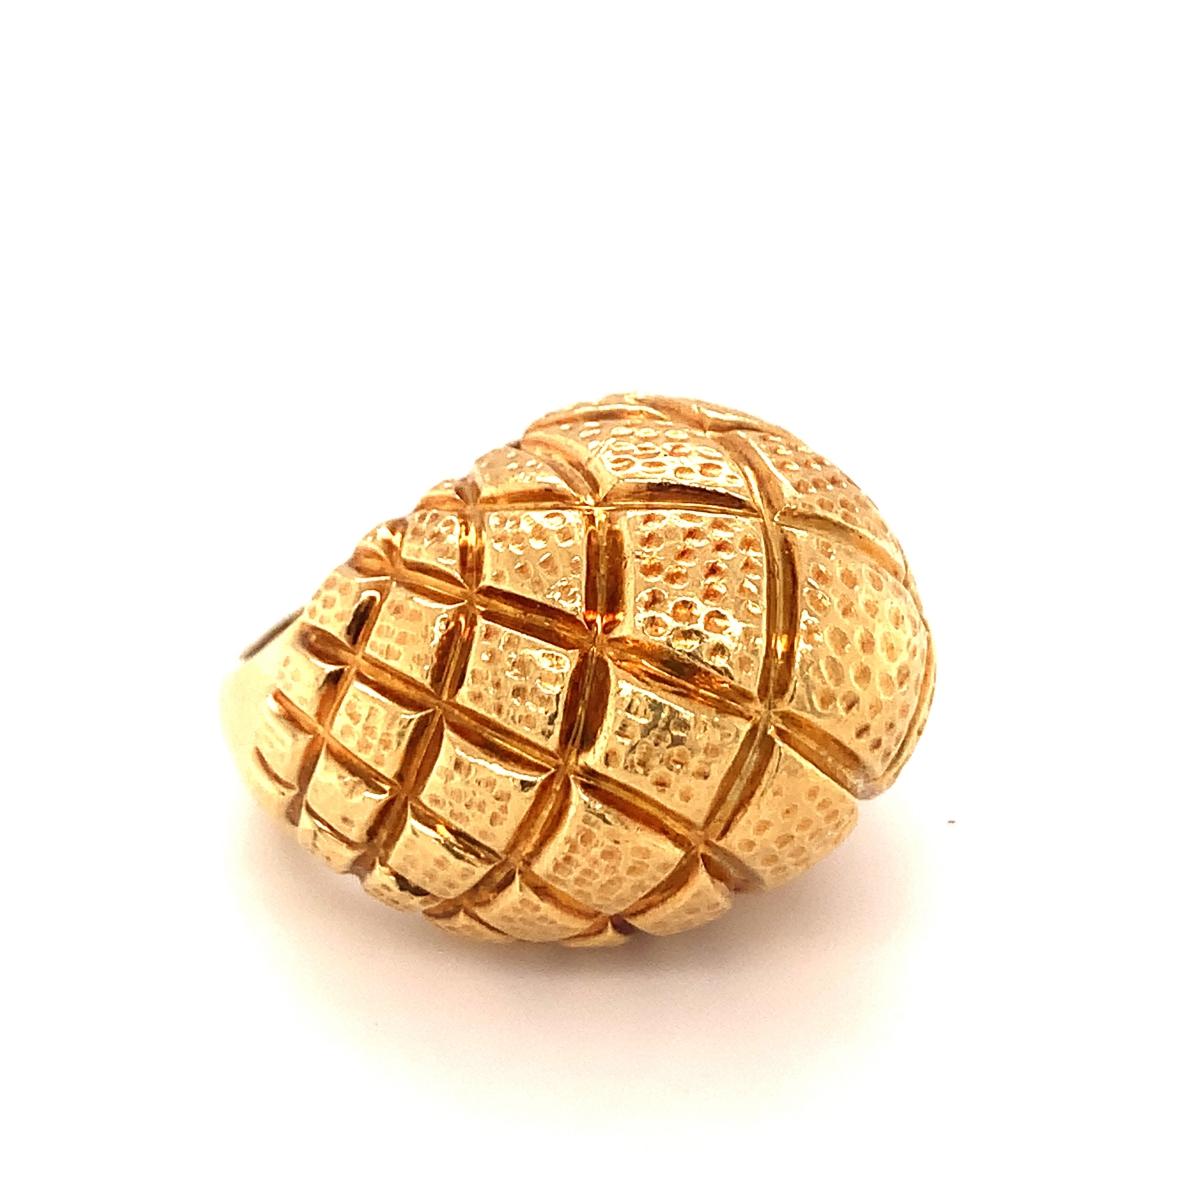 Women's Immense 22K Yellow Gold Dome Ring, circa 1960s For Sale